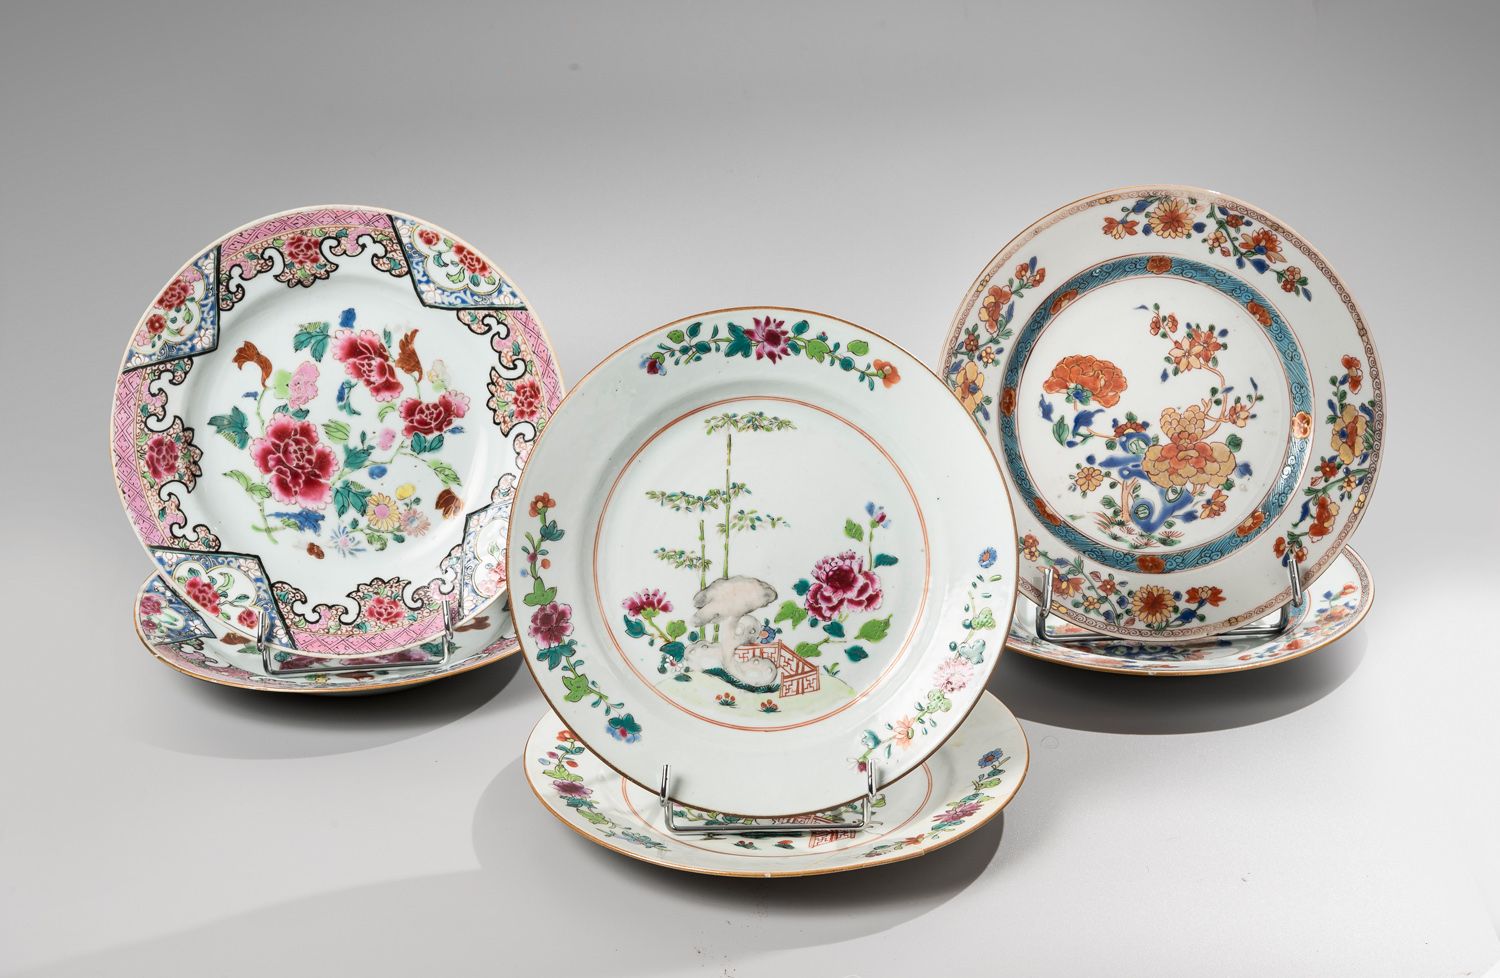 Null CHINA, Compagnie des Indes, 18th century

Three pairs of porcelain and enam&hellip;